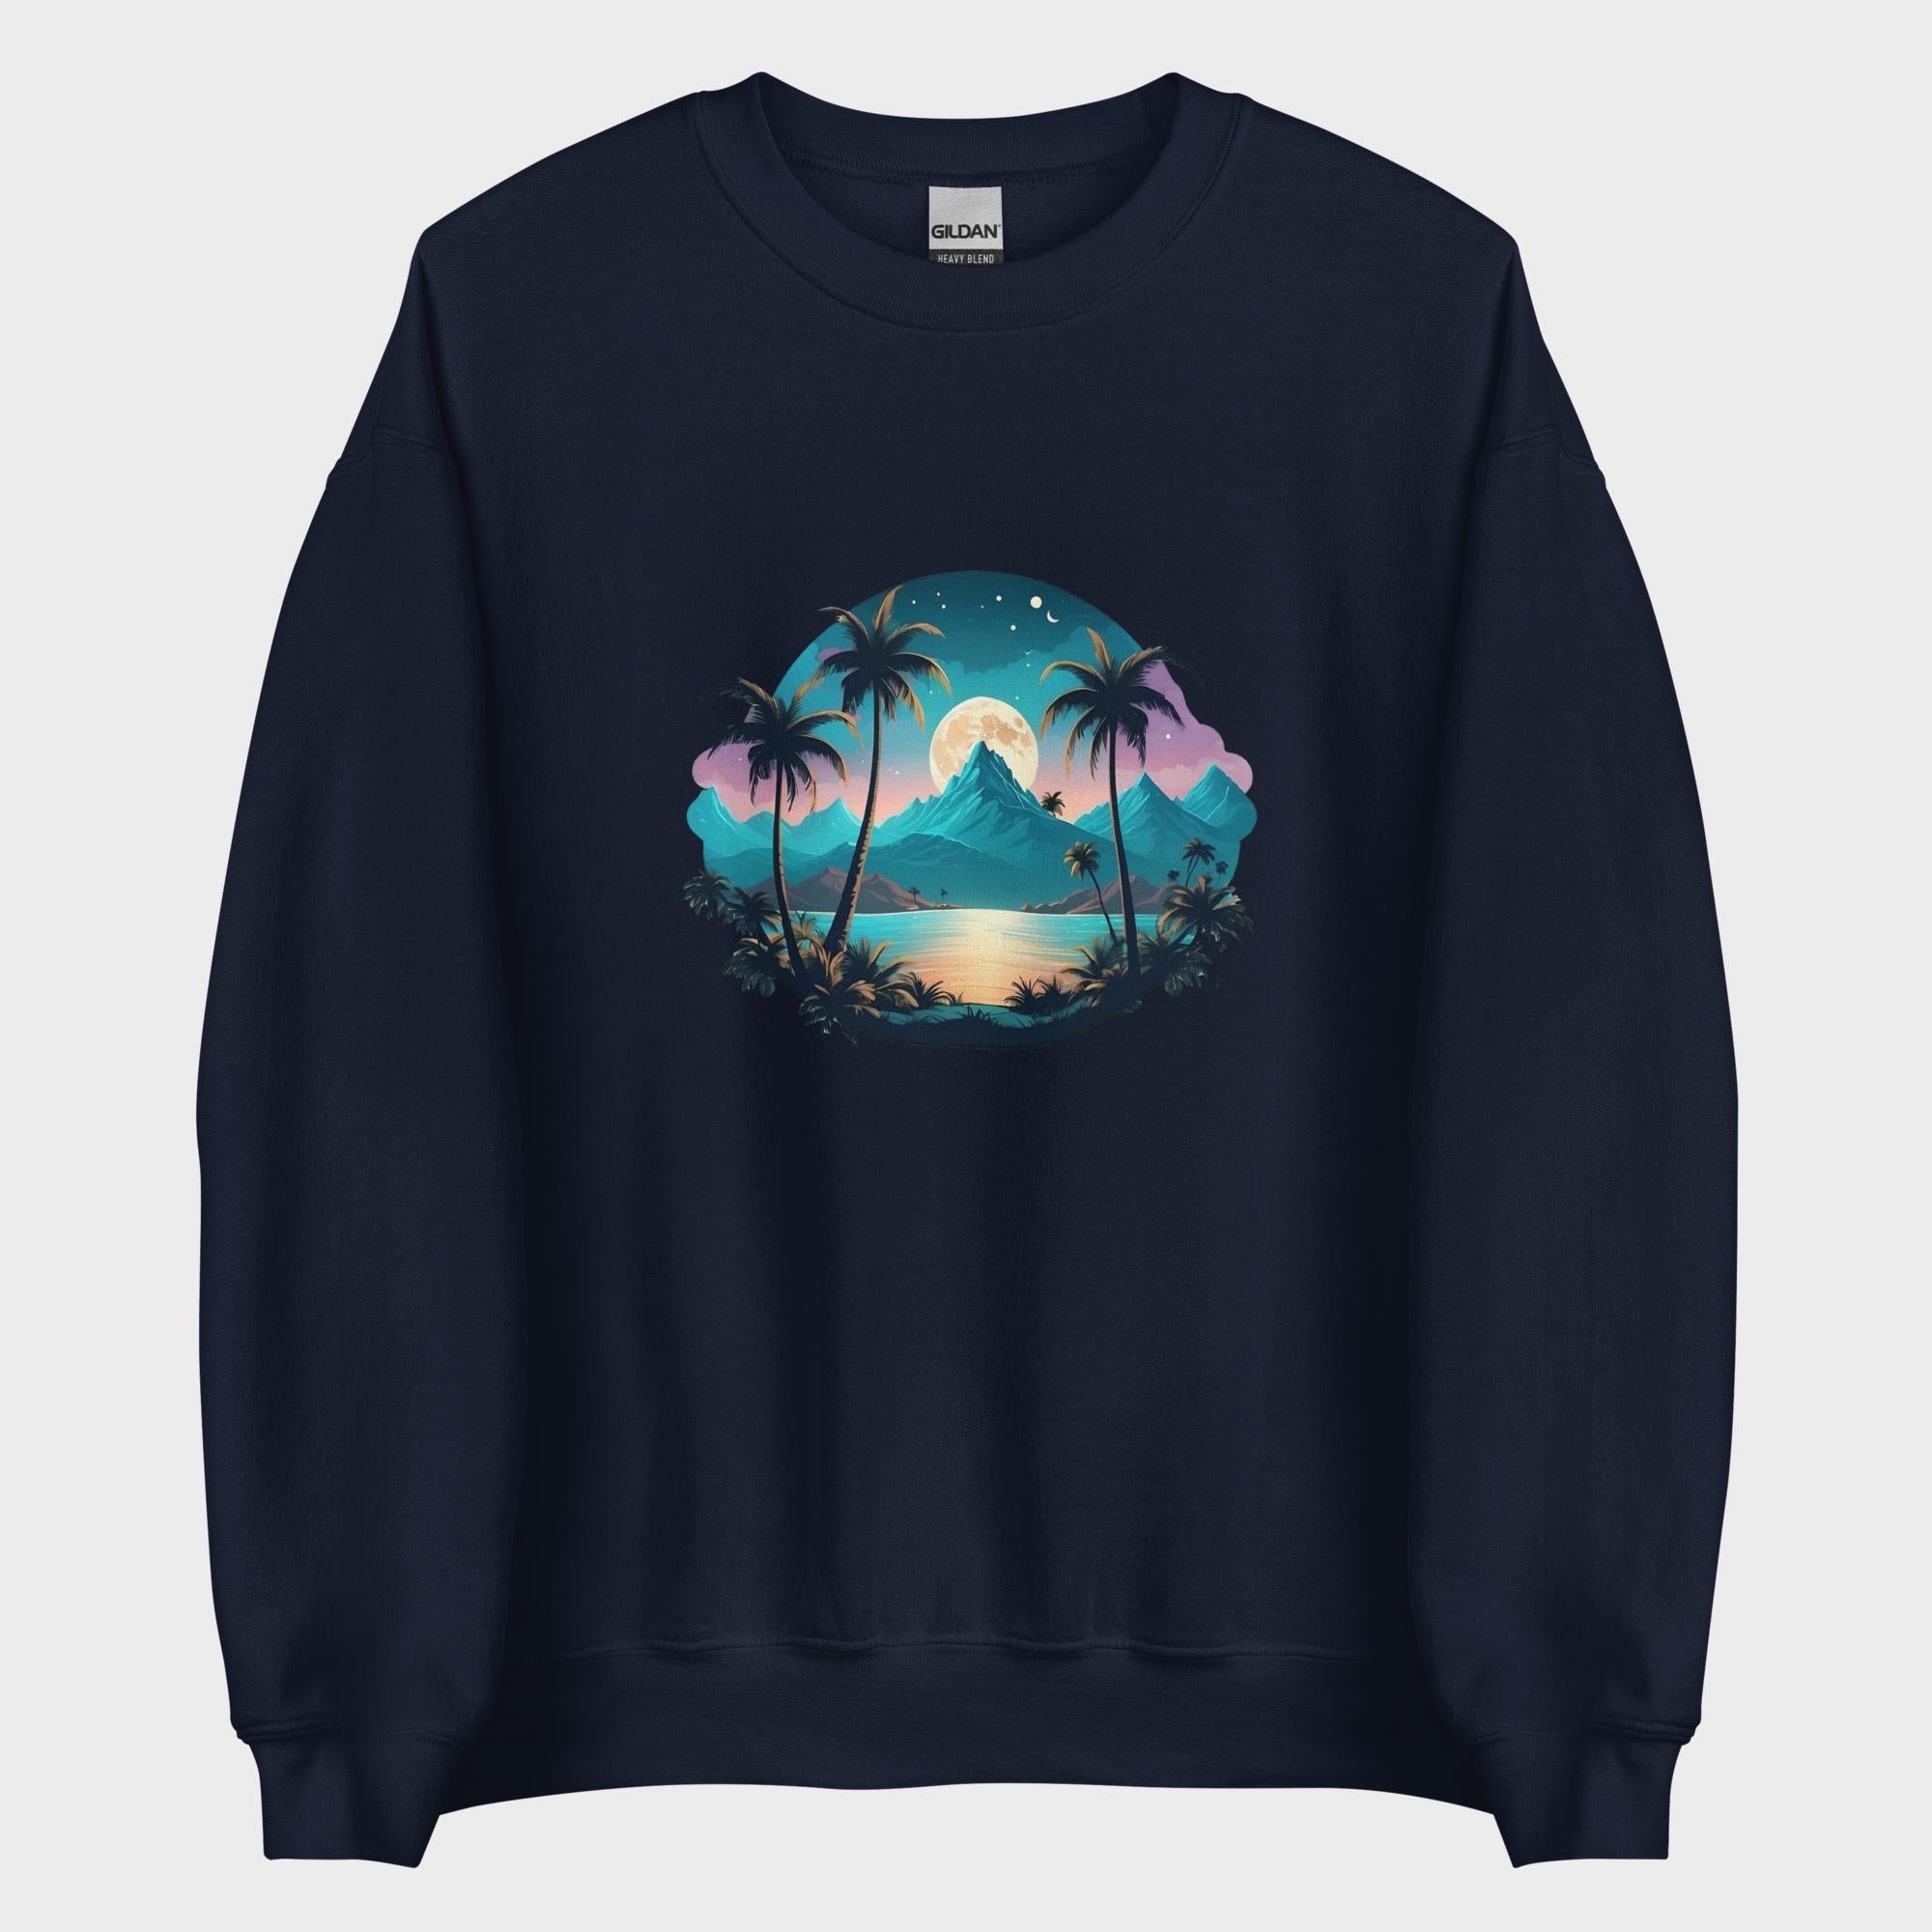 The Place To Be - Sweatshirt